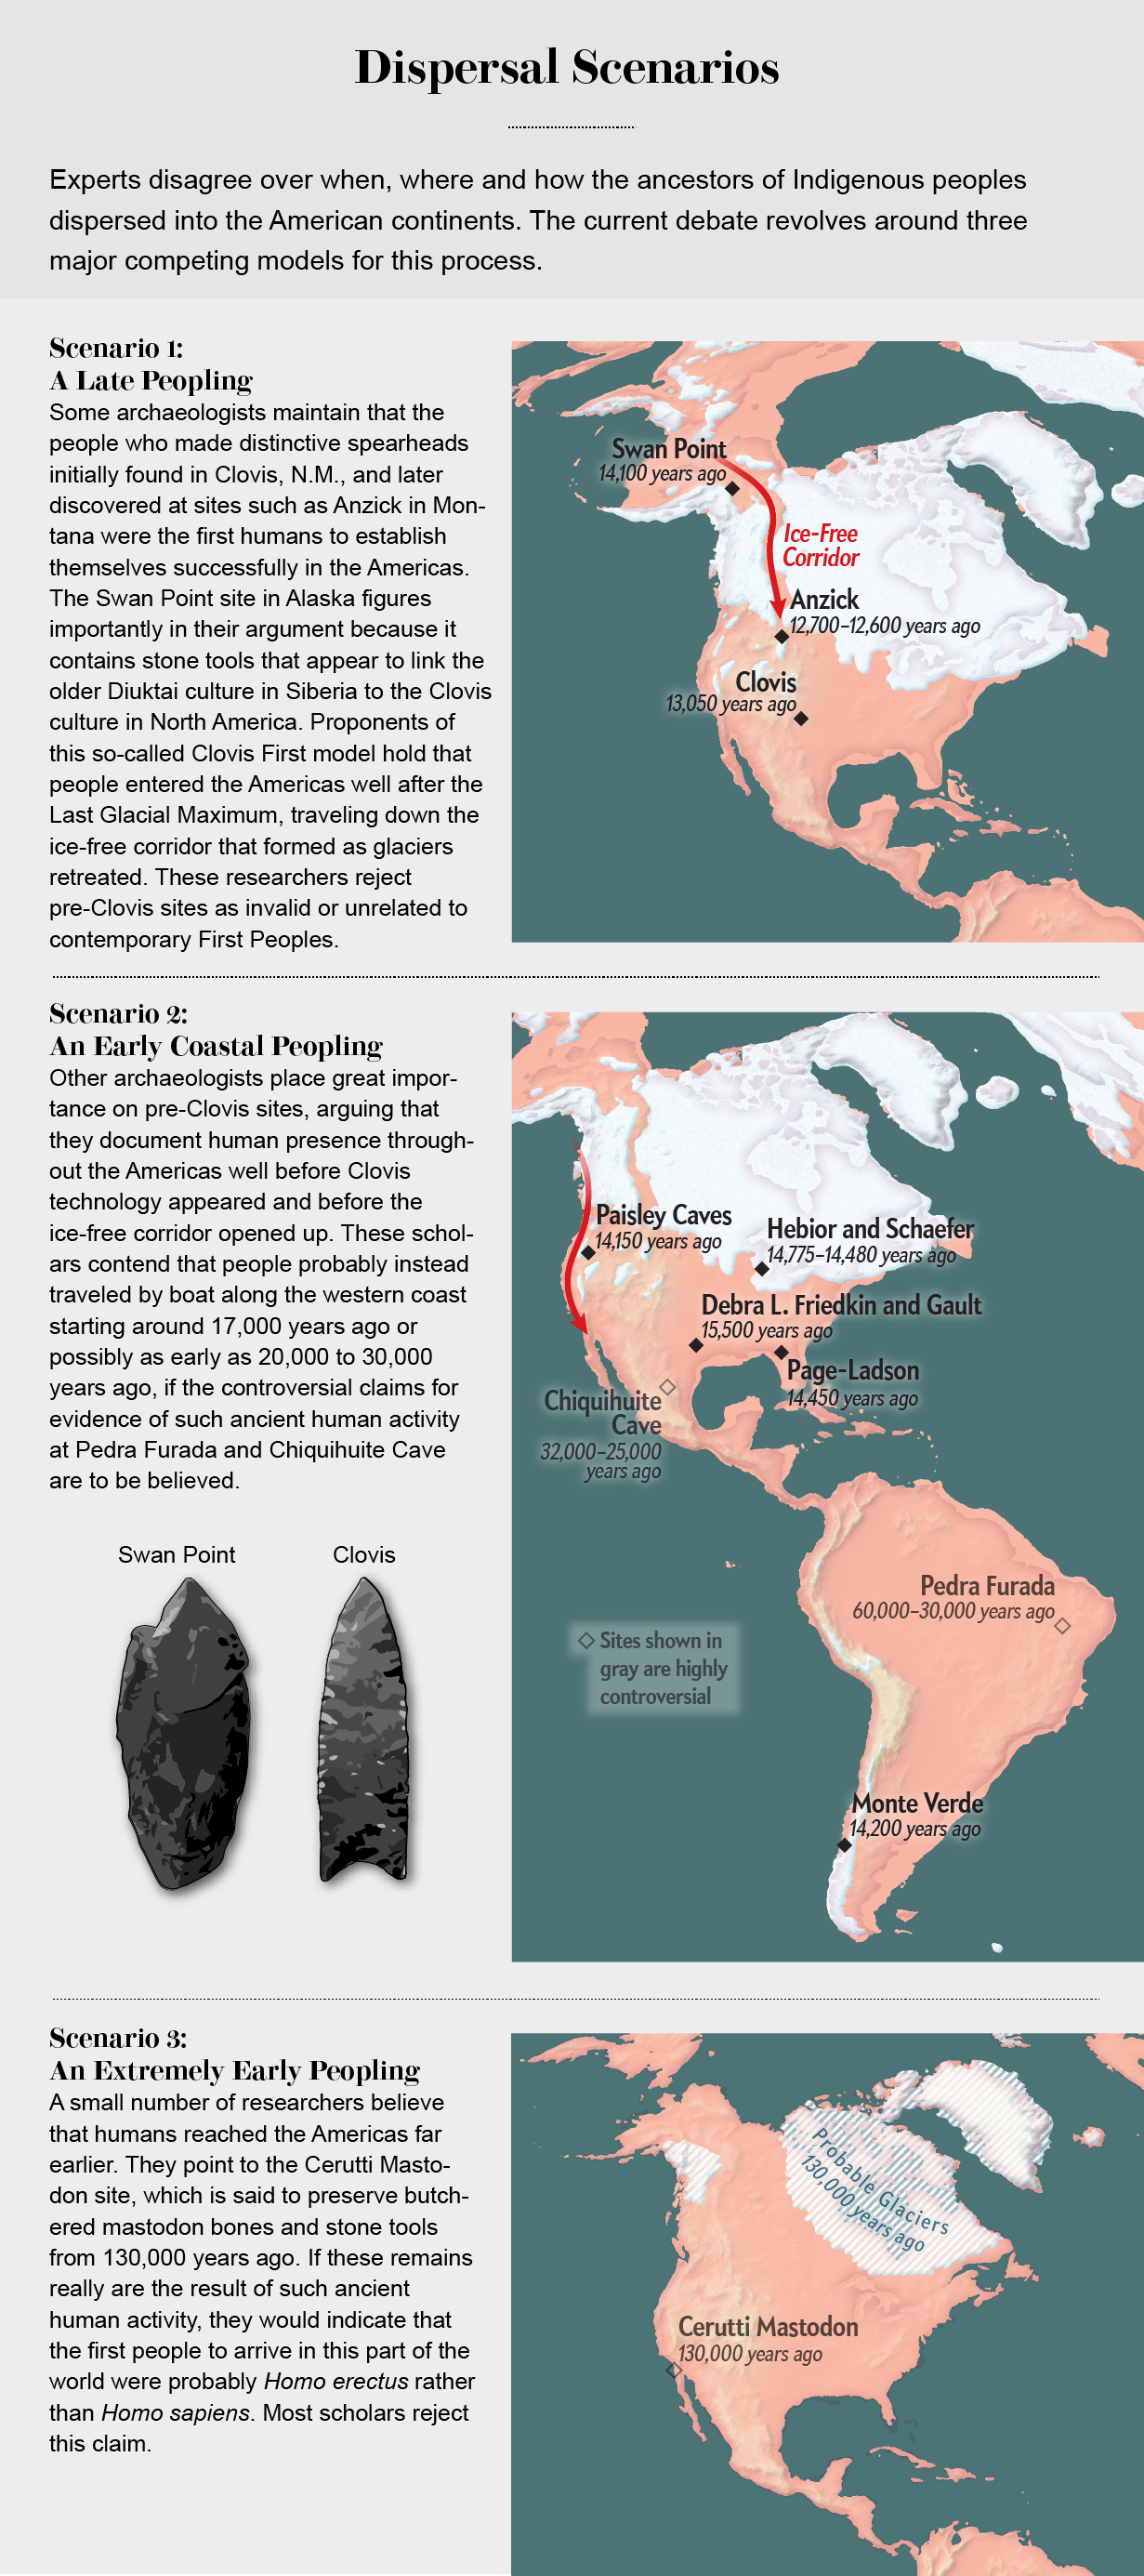 Maps show three scenarios of how Indigenous peoples may have dispersed into the American continents.